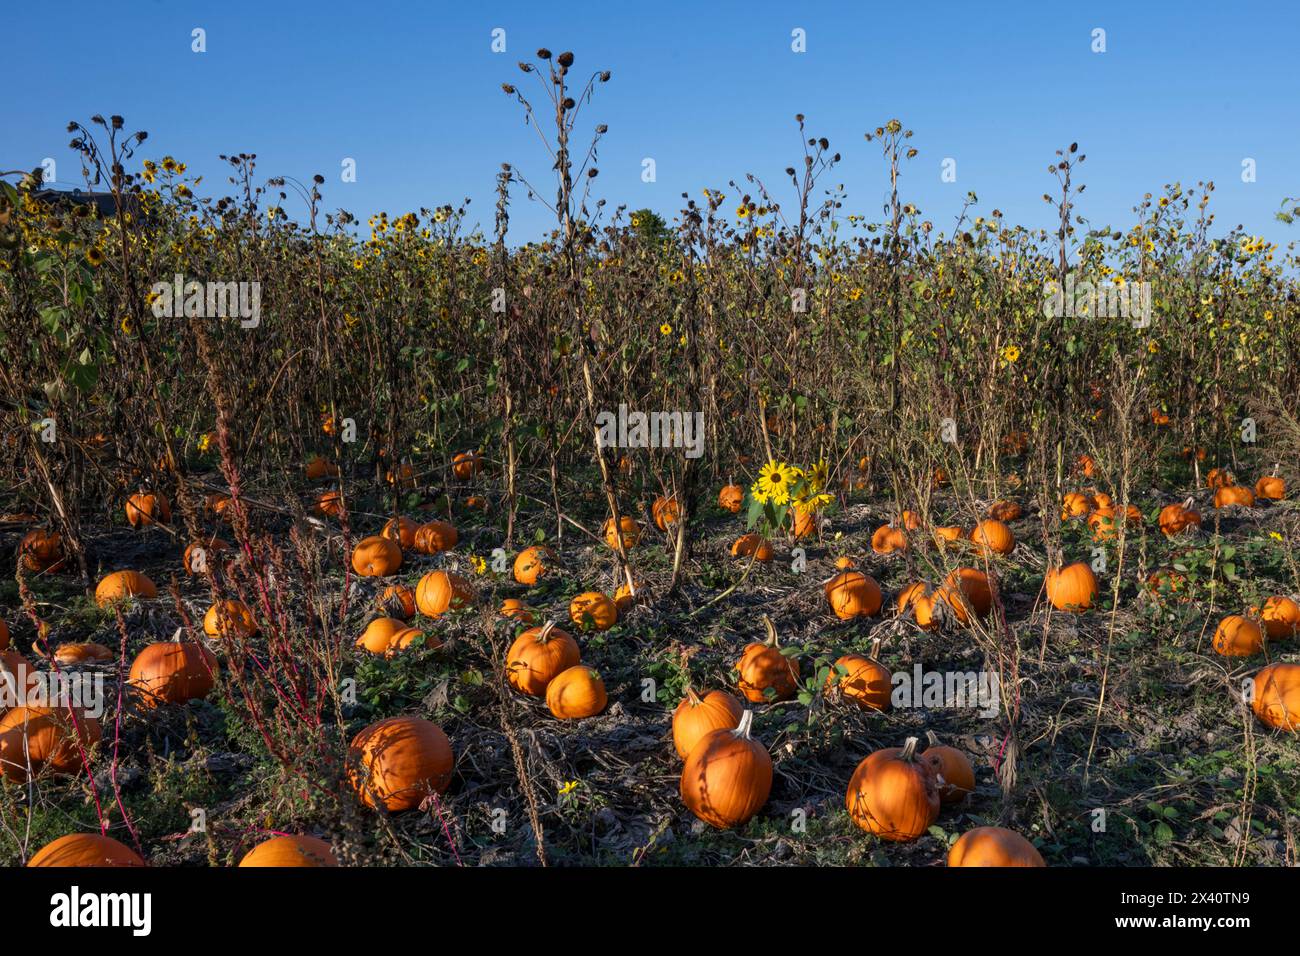 Pumpkin patch and sunflowers in a field with a blue sky at Bickford Farms; Vancouver Island, British Columbia, Canada Stock Photo